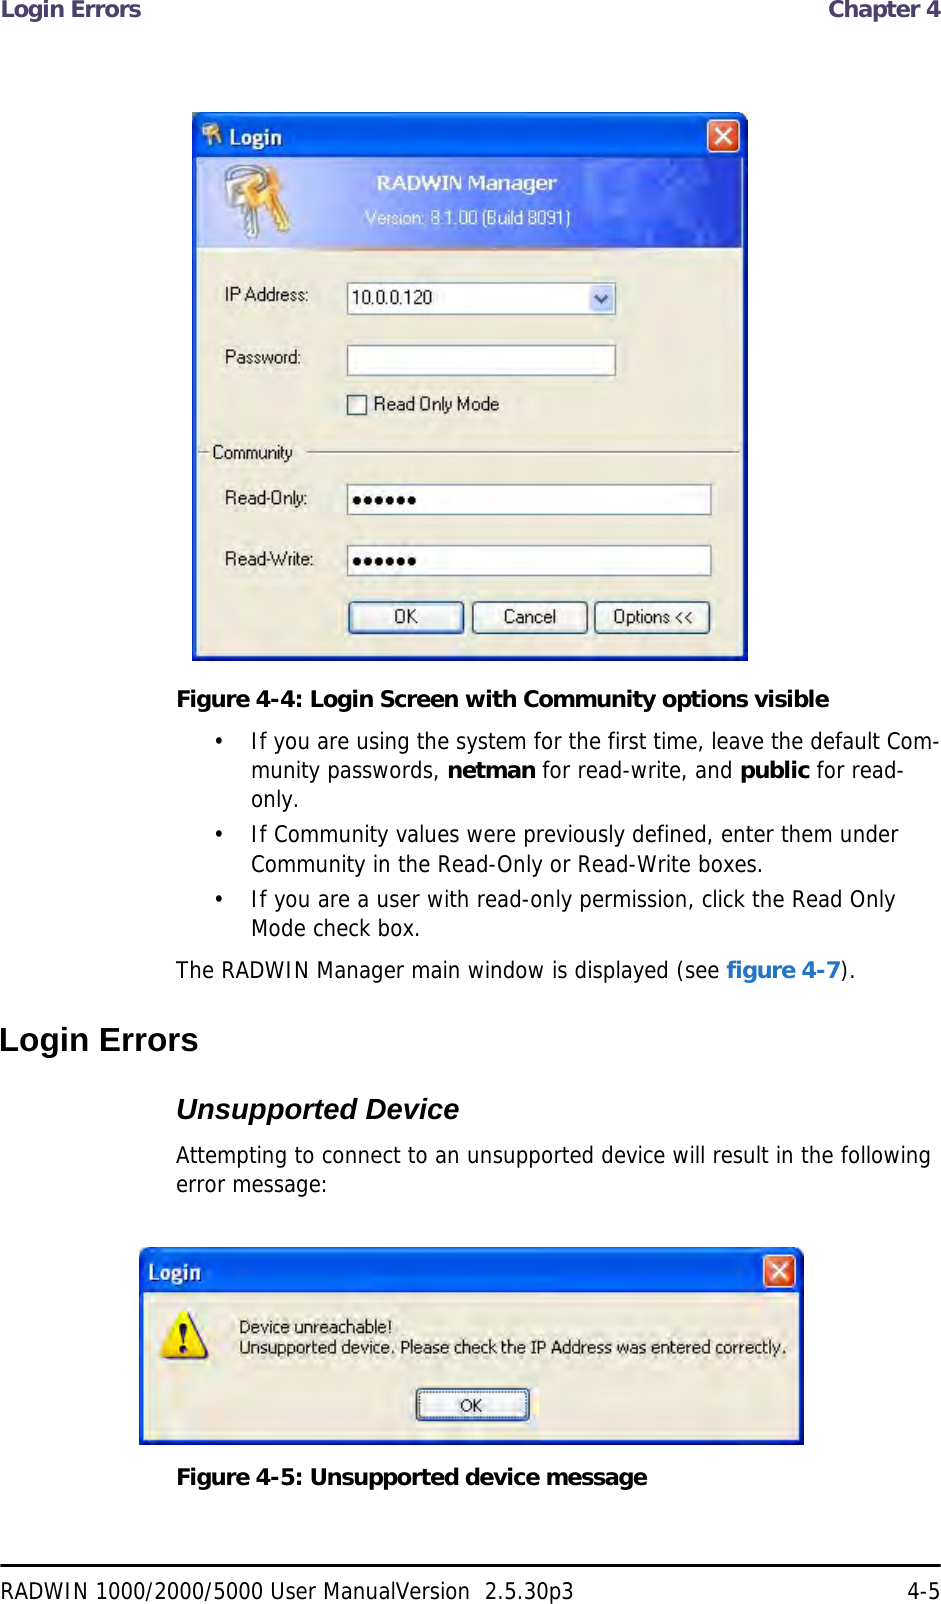 Login Errors  Chapter 4RADWIN 1000/2000/5000 User ManualVersion  2.5.30p3 4-5Figure 4-4: Login Screen with Community options visible• If you are using the system for the first time, leave the default Com-munity passwords, netman for read-write, and public for read-only.• If Community values were previously defined, enter them under Community in the Read-Only or Read-Write boxes.• If you are a user with read-only permission, click the Read Only Mode check box.The RADWIN Manager main window is displayed (see figure 4-7).Login ErrorsUnsupported DeviceAttempting to connect to an unsupported device will result in the following error message:Figure 4-5: Unsupported device message